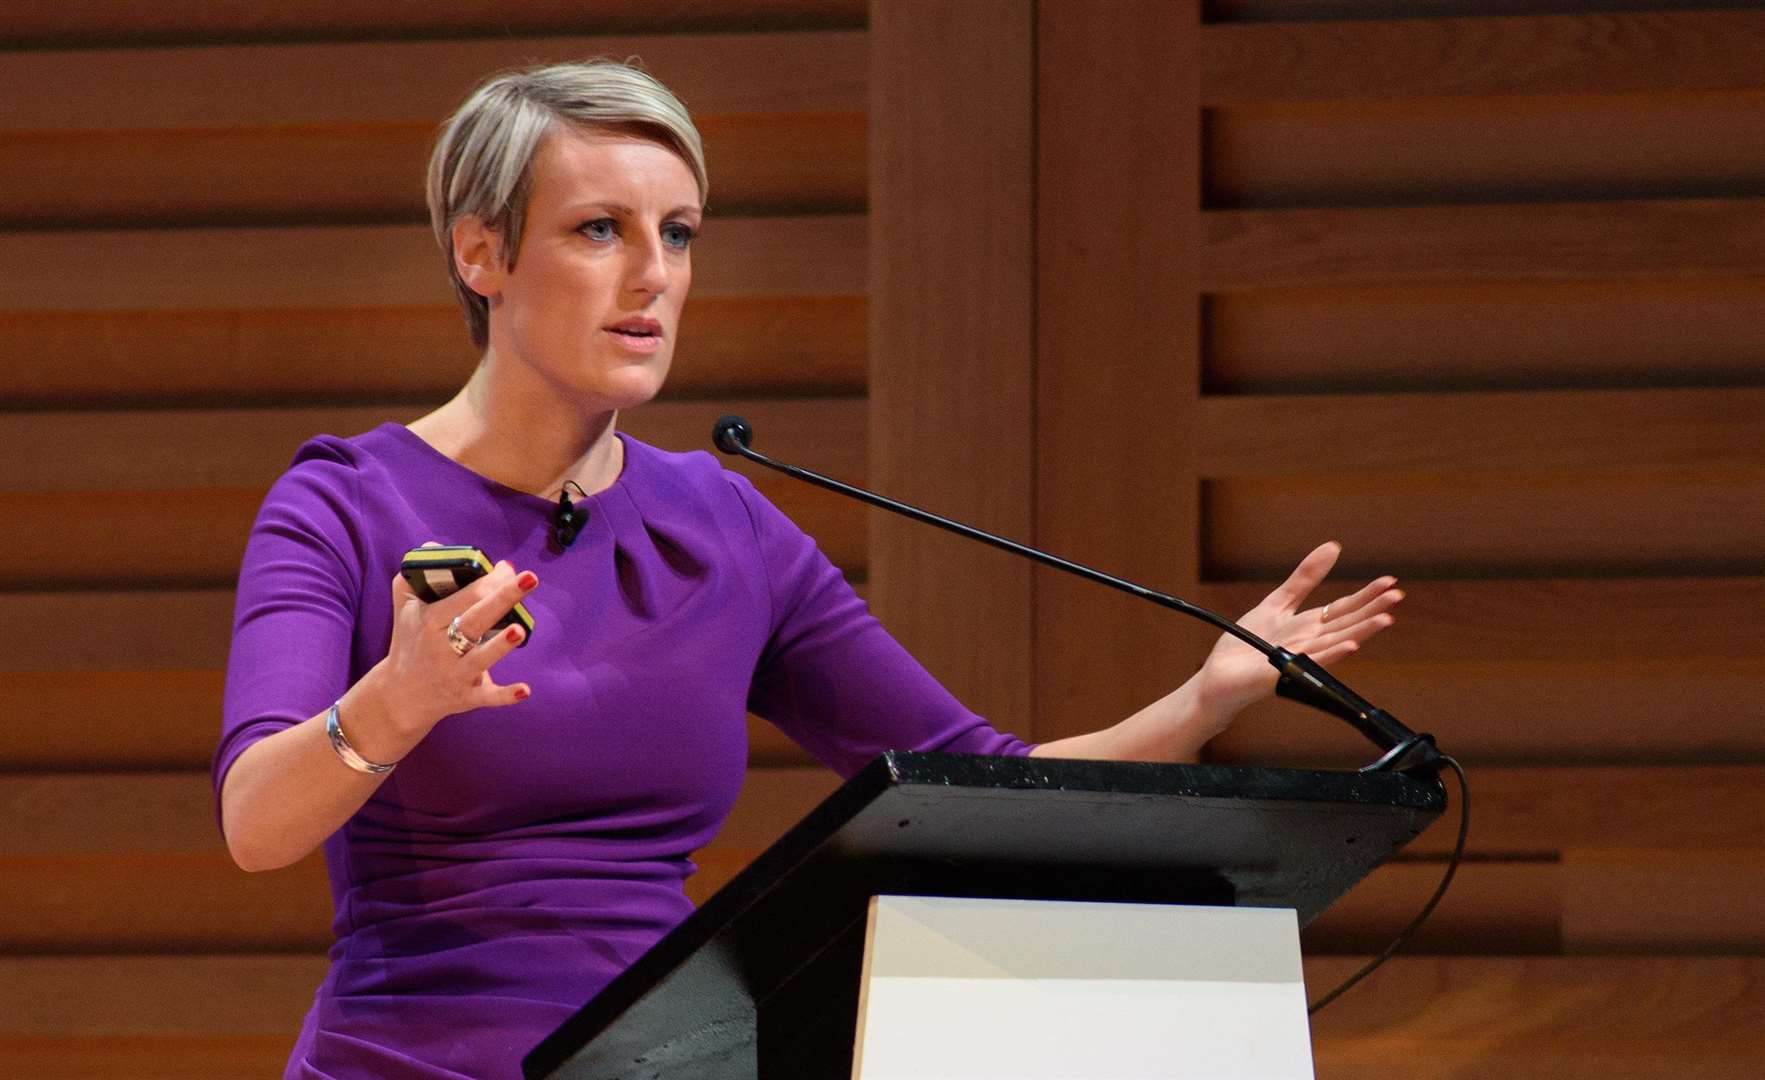 BBC broadcaster Steph McGovern was keynote speaker at this year's event